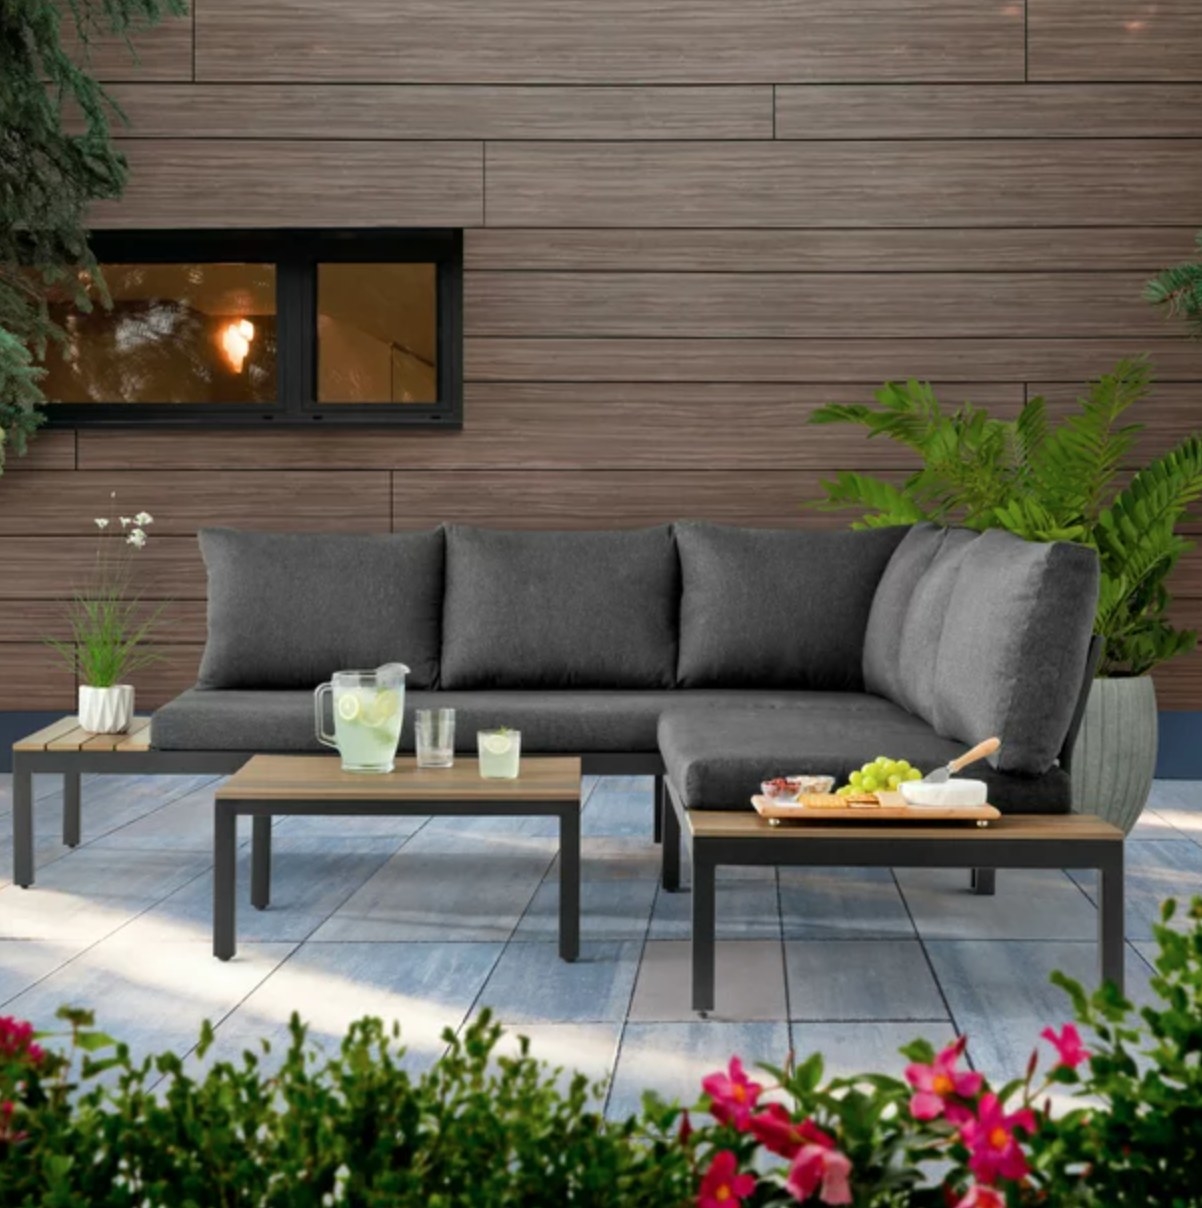 the grey sectional with attached light wood tables and a separate light wood coffee table in a decorated patio space